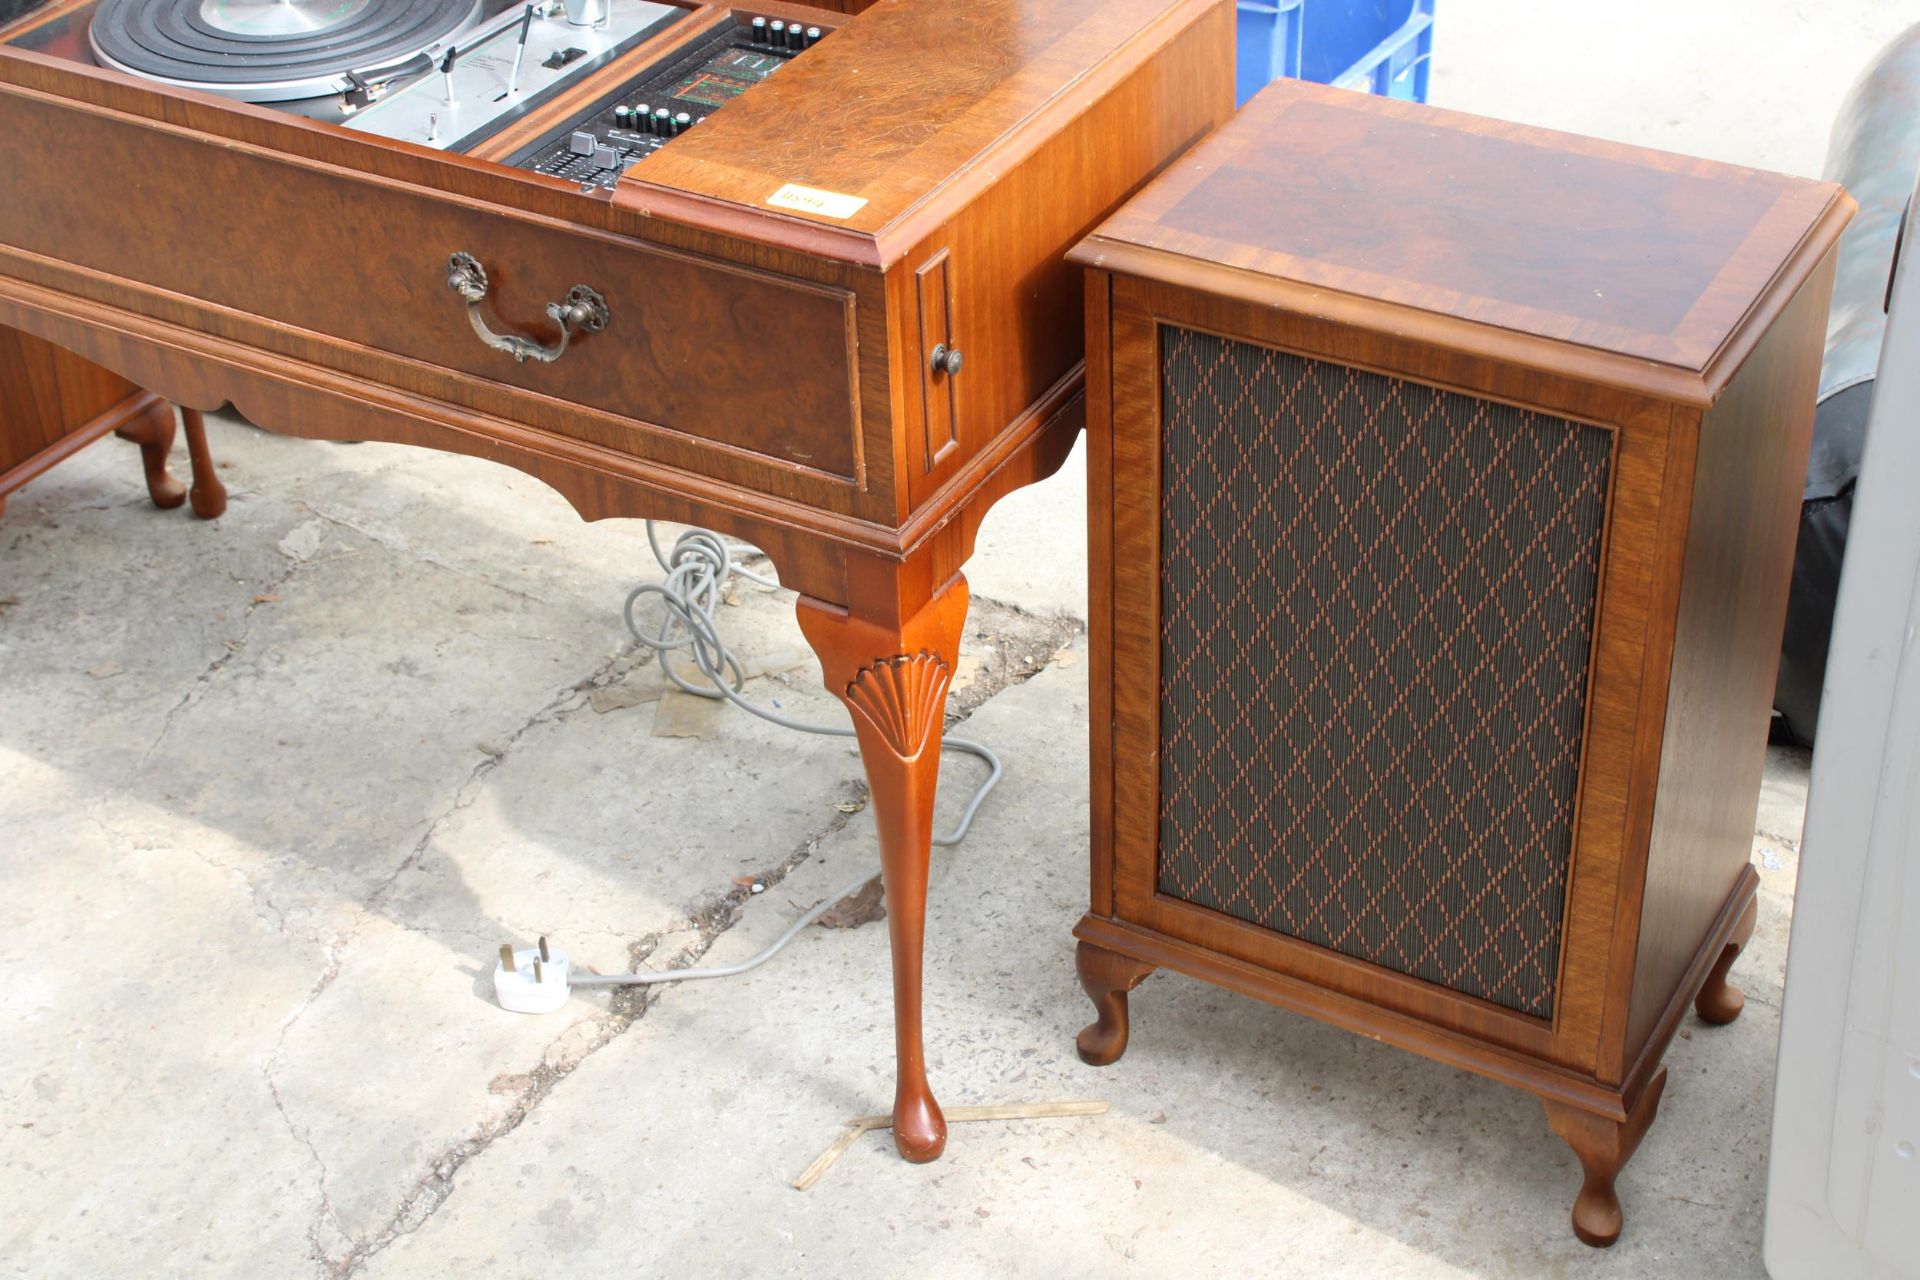 A VINTAGE MID CENTURY RADIOGRAM WITH A DRAYTON DECK AND SPEAKERS - Bild 3 aus 6